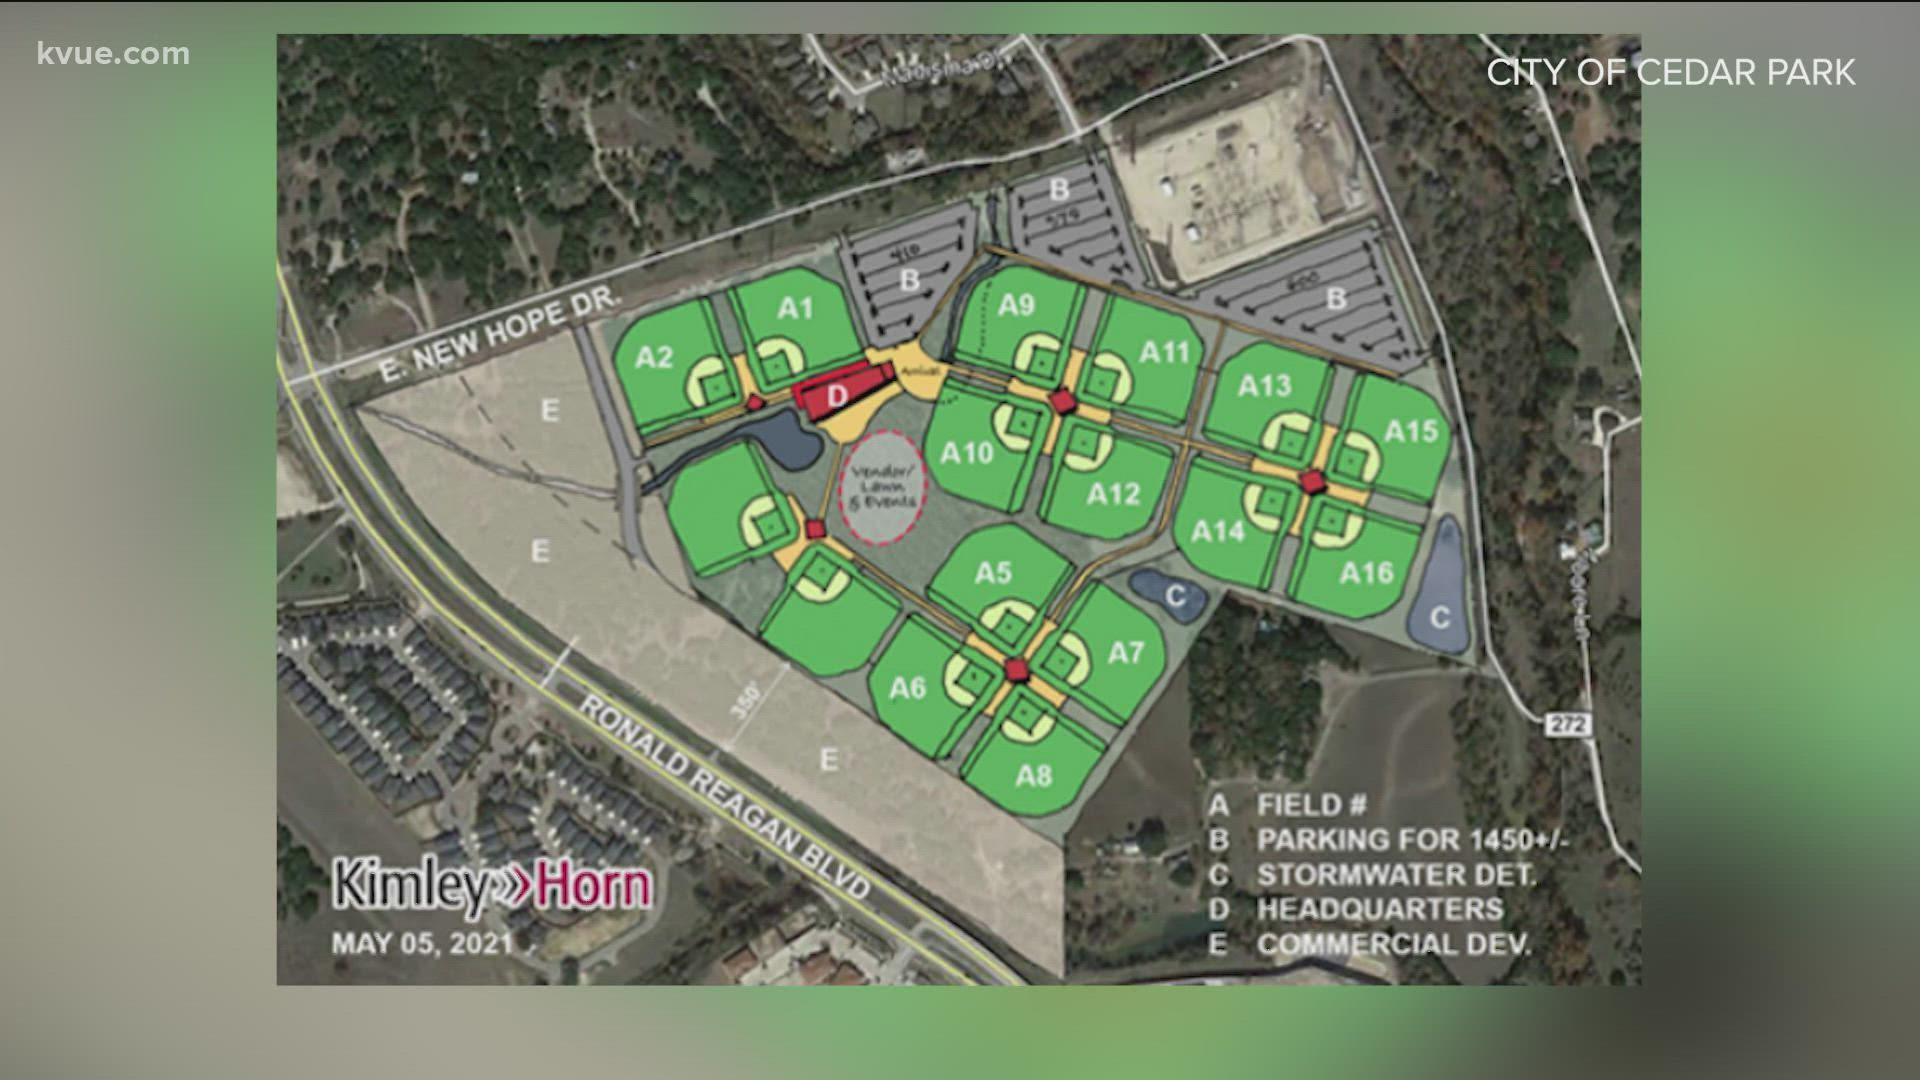 A new sports complex is on its way to Cedar Park.